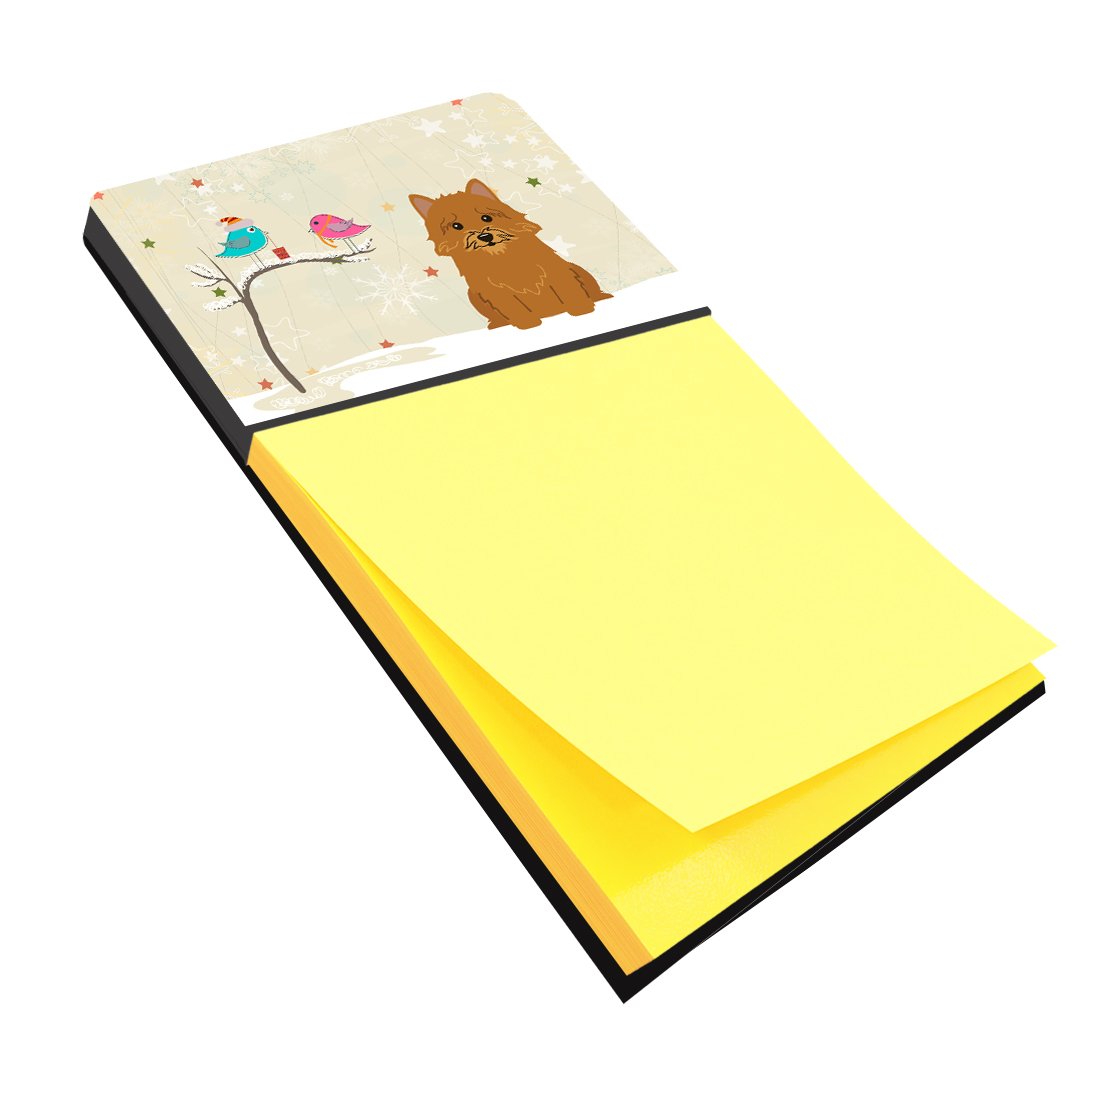 Christmas Presents between Friends Norwich Terrier Sticky Note Holder BB2492SN by Caroline's Treasures